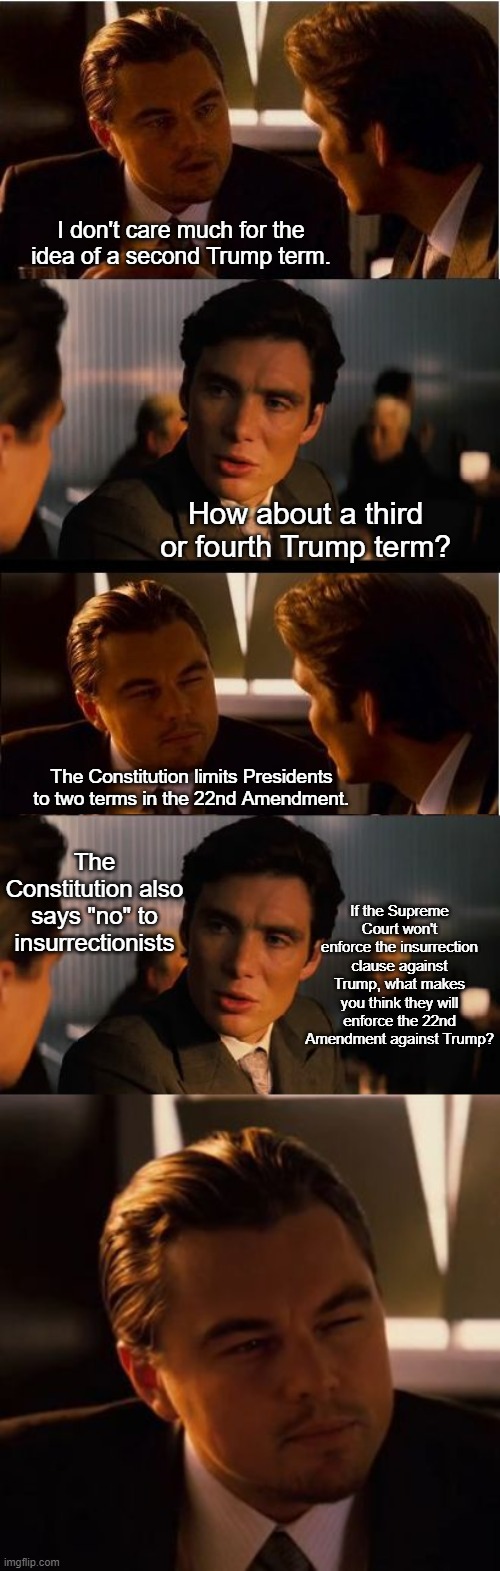 Something to think about | I don't care much for the idea of a second Trump term. How about a third or fourth Trump term? The Constitution limits Presidents to two terms in the 22nd Amendment. The Constitution also says "no" to insurrectionists; If the Supreme Court won't enforce the insurrection clause against Trump, what makes you think they will enforce the 22nd Amendment against Trump? | image tagged in inception,memes,inception stare,political meme | made w/ Imgflip meme maker